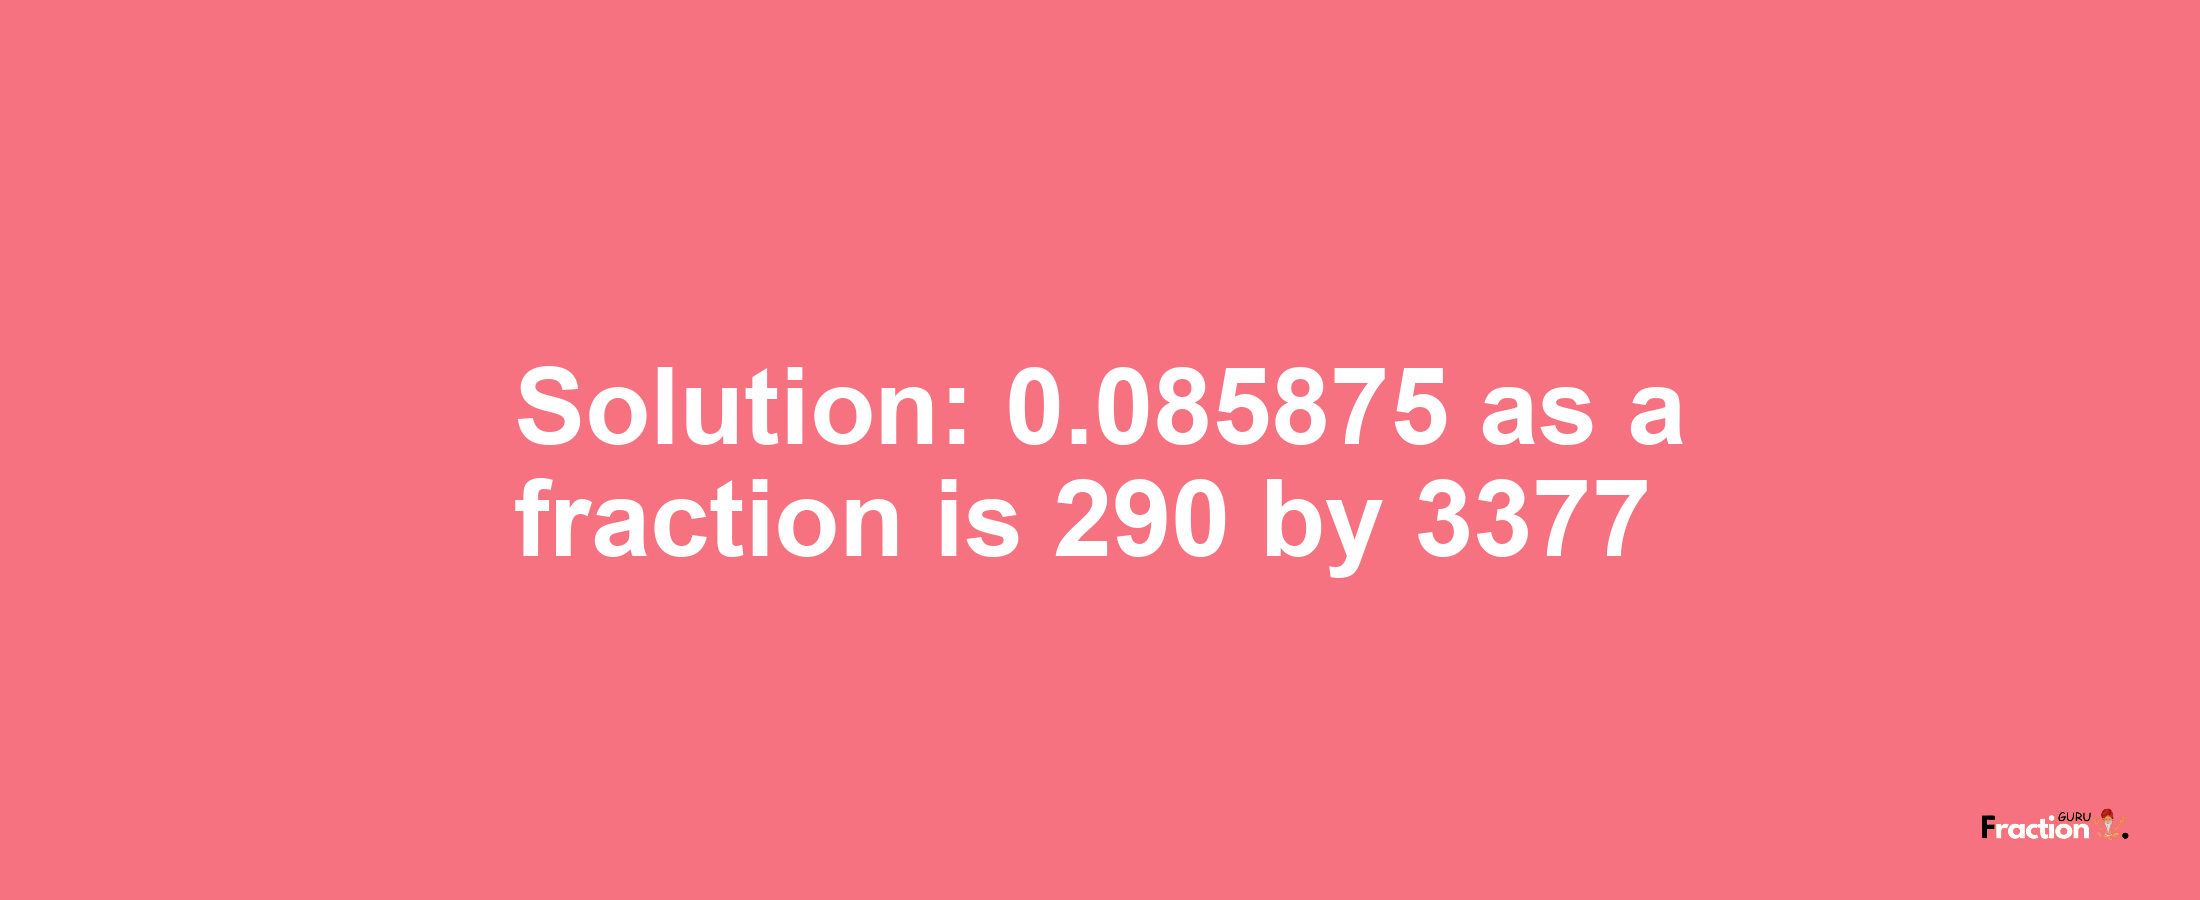 Solution:0.085875 as a fraction is 290/3377